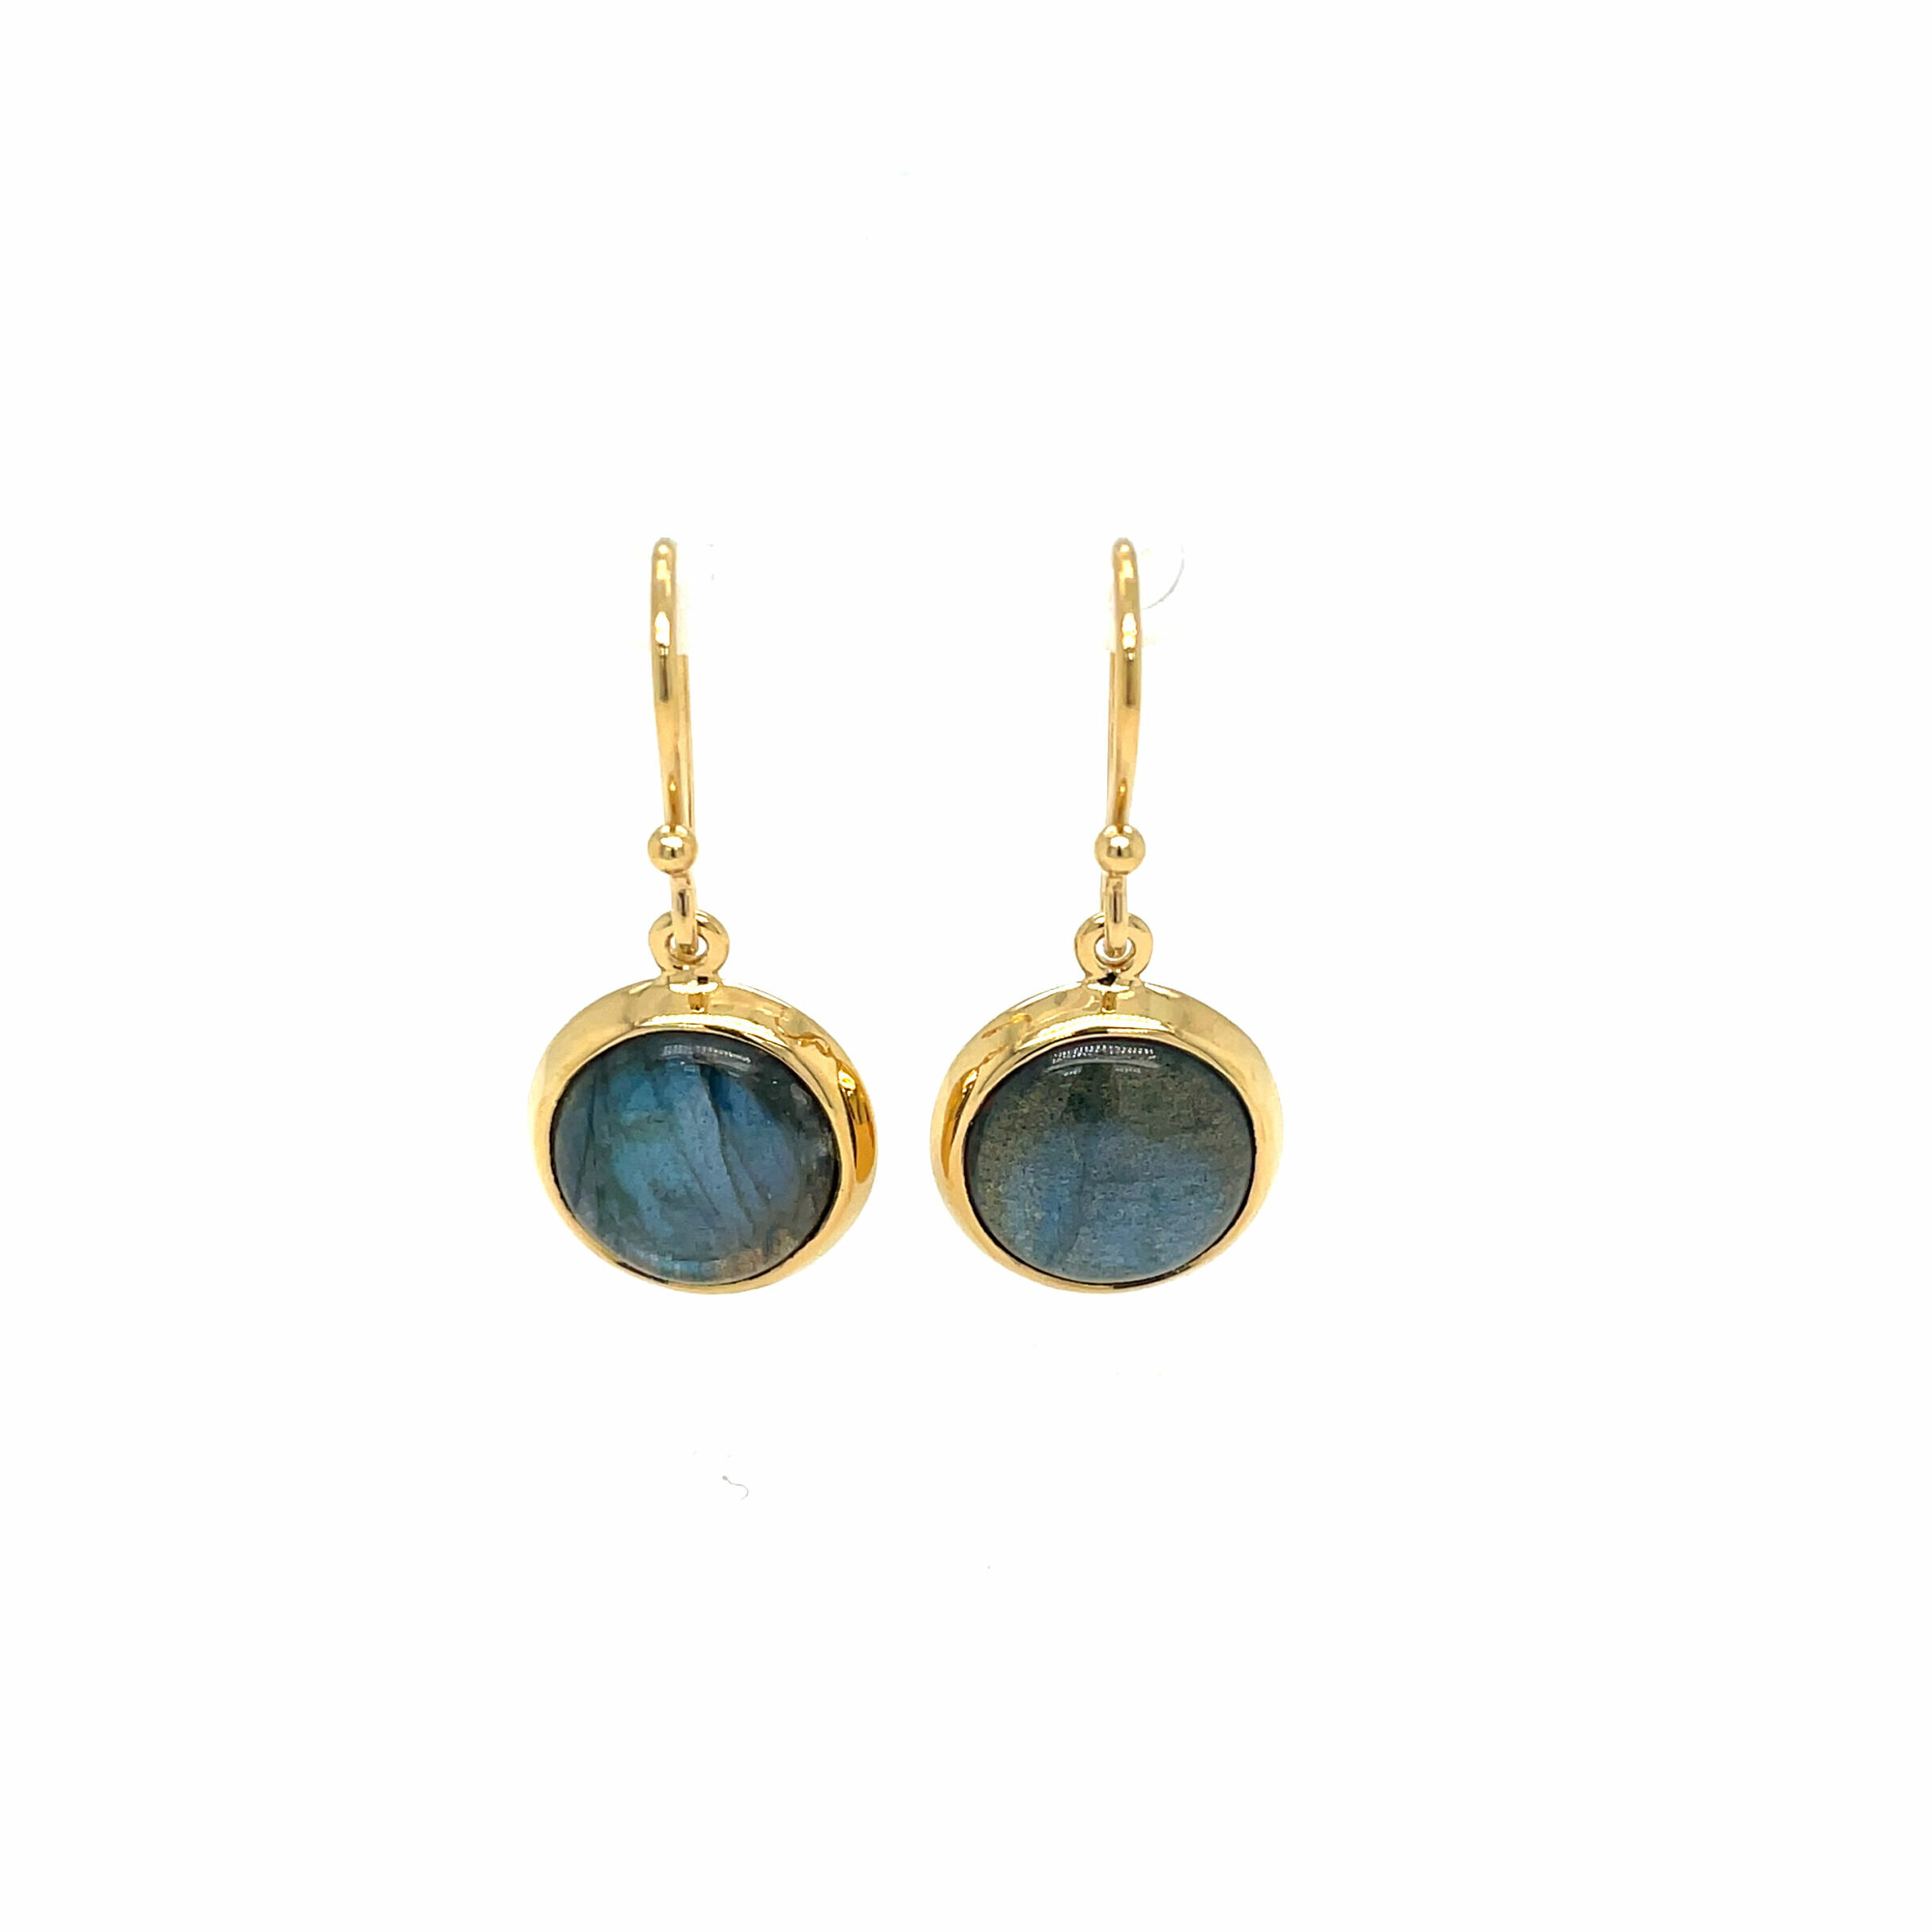 Stephen Estelle Sterling Silver with Yellow Gold Vermeil Labradorite Earrings